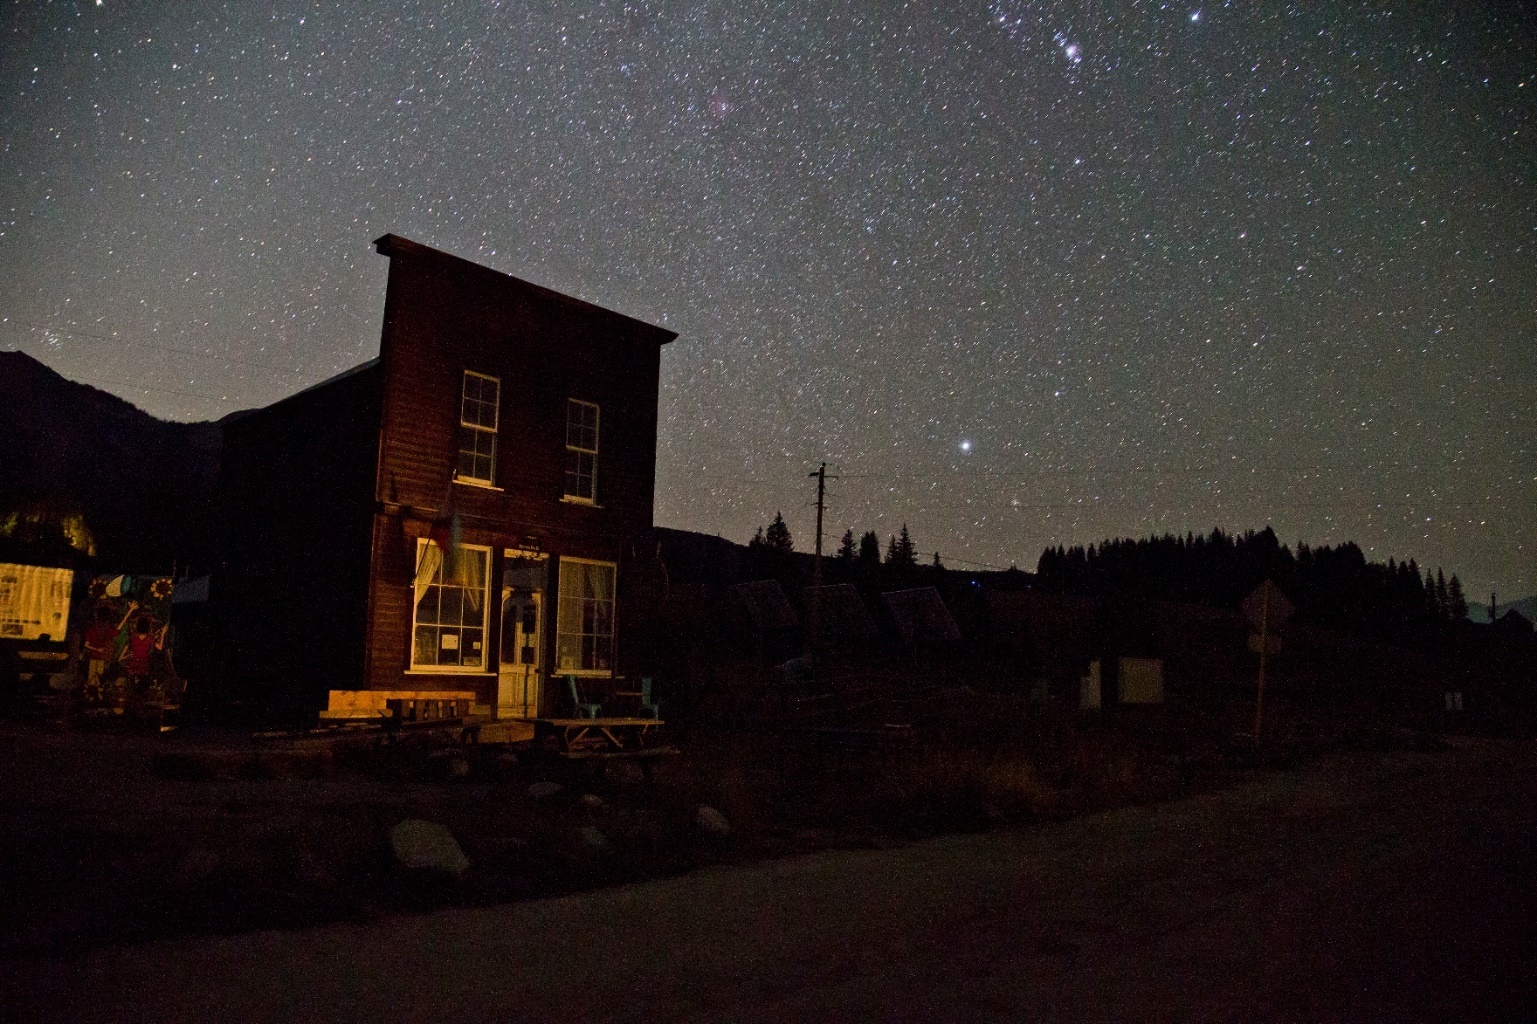 The Milky Way is always visible on clear nights in Gothic, an old Colorado mining town more than 9,000 feet above sea level. SAIL’s main instrument site is in Gothic.